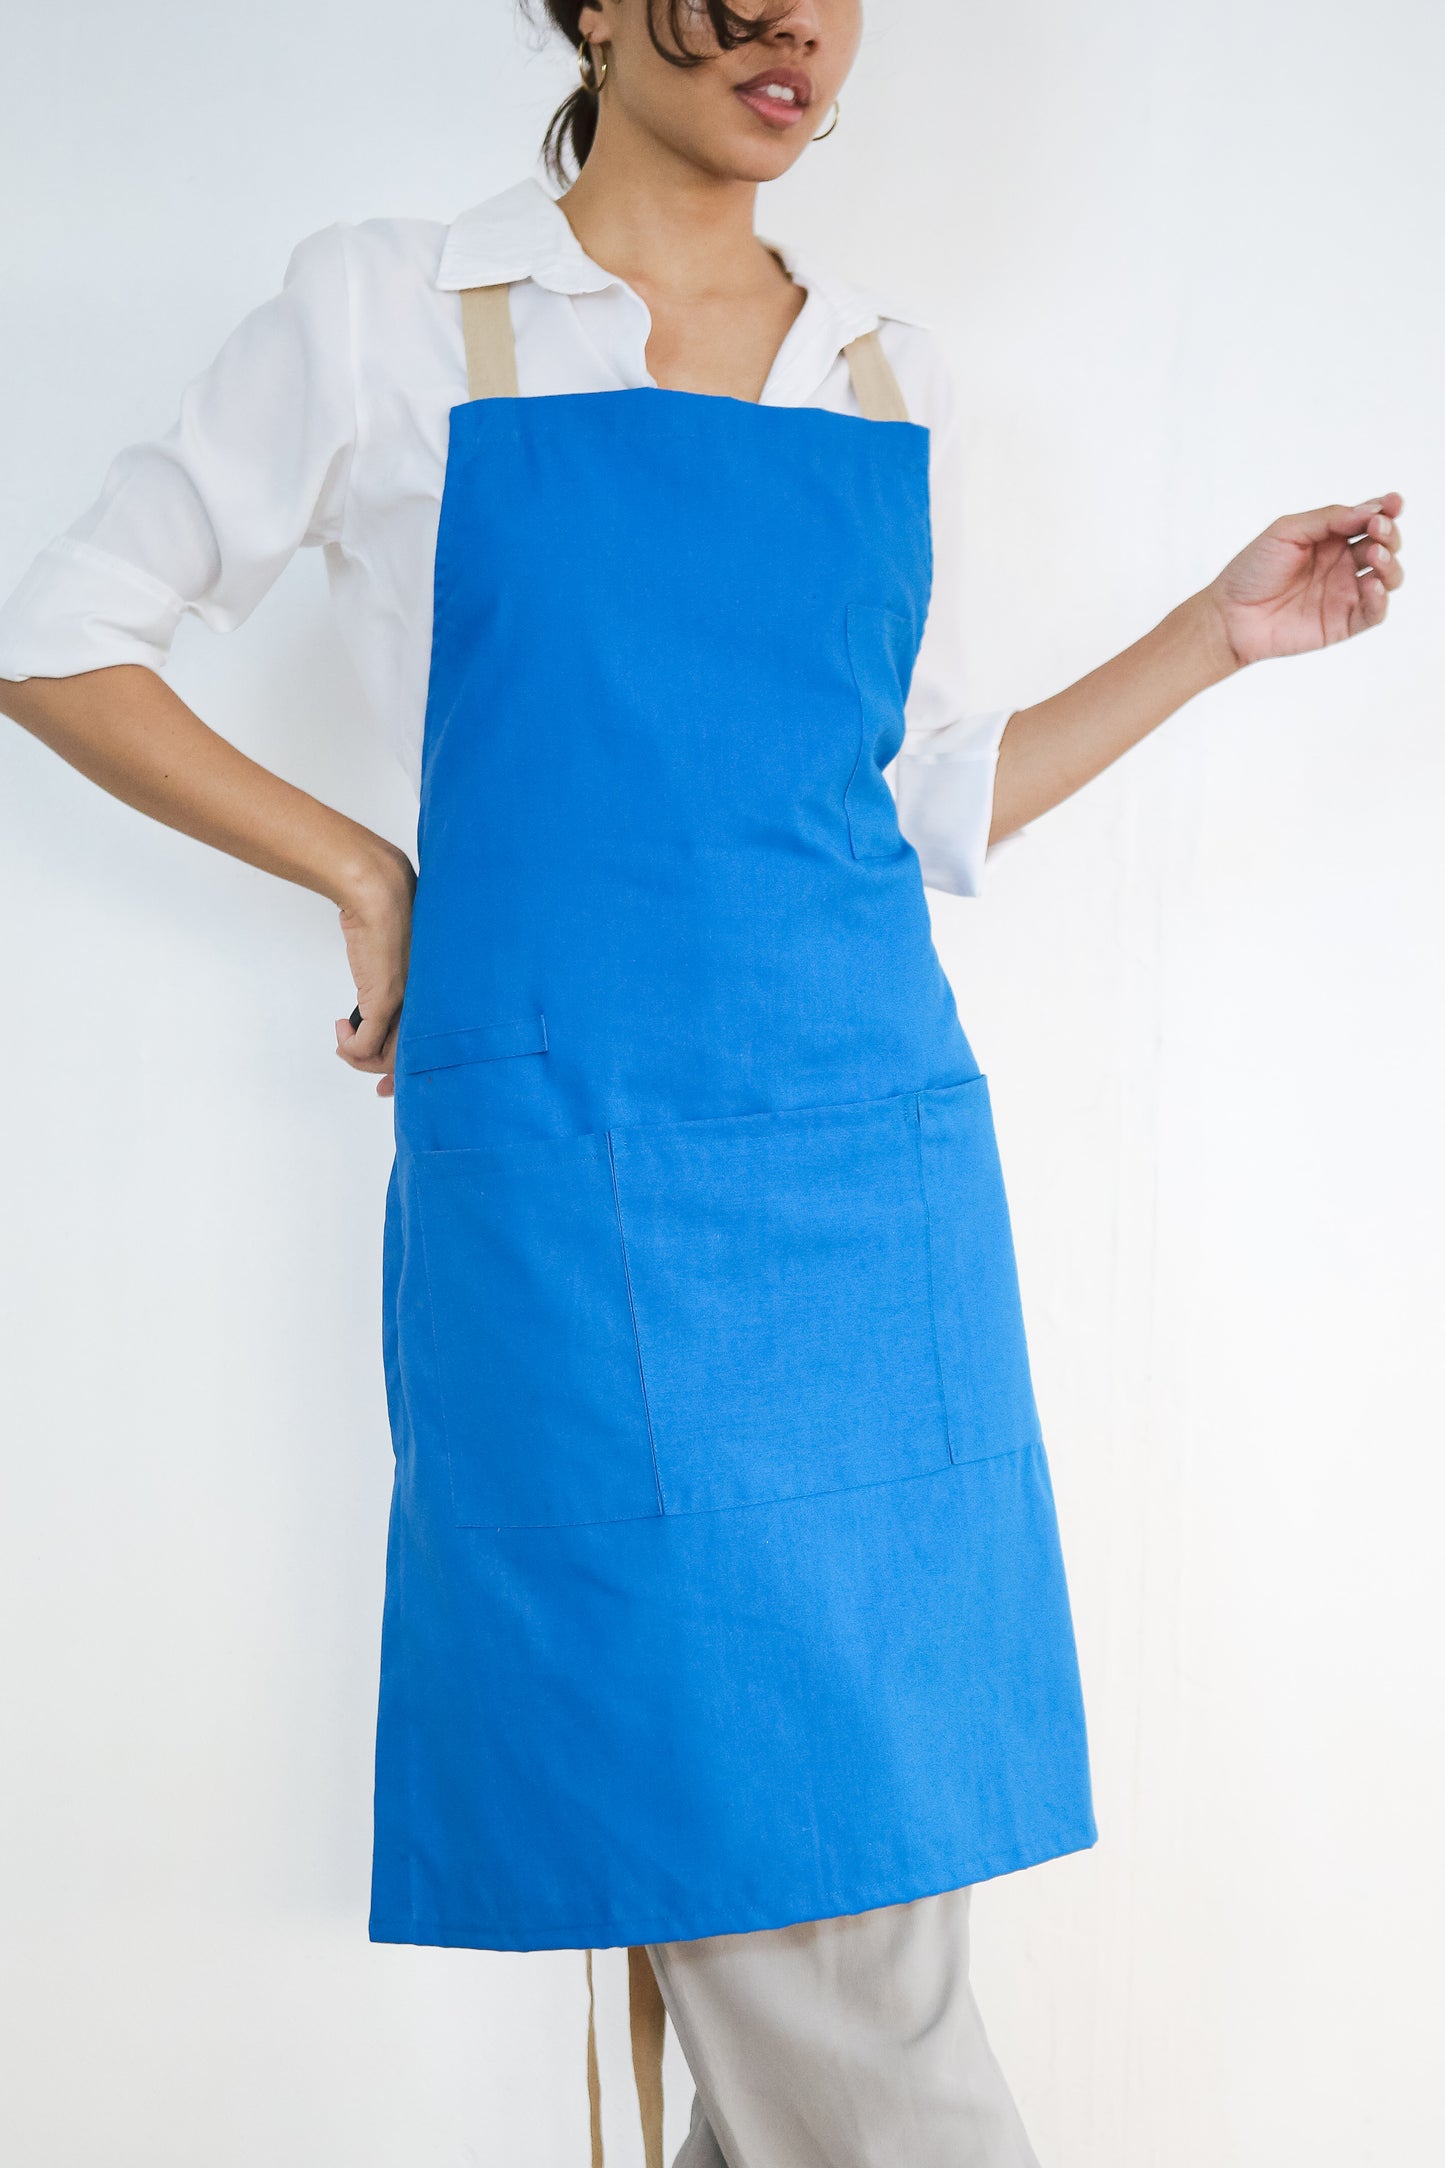 Tropical Cross-back Apron in Wave